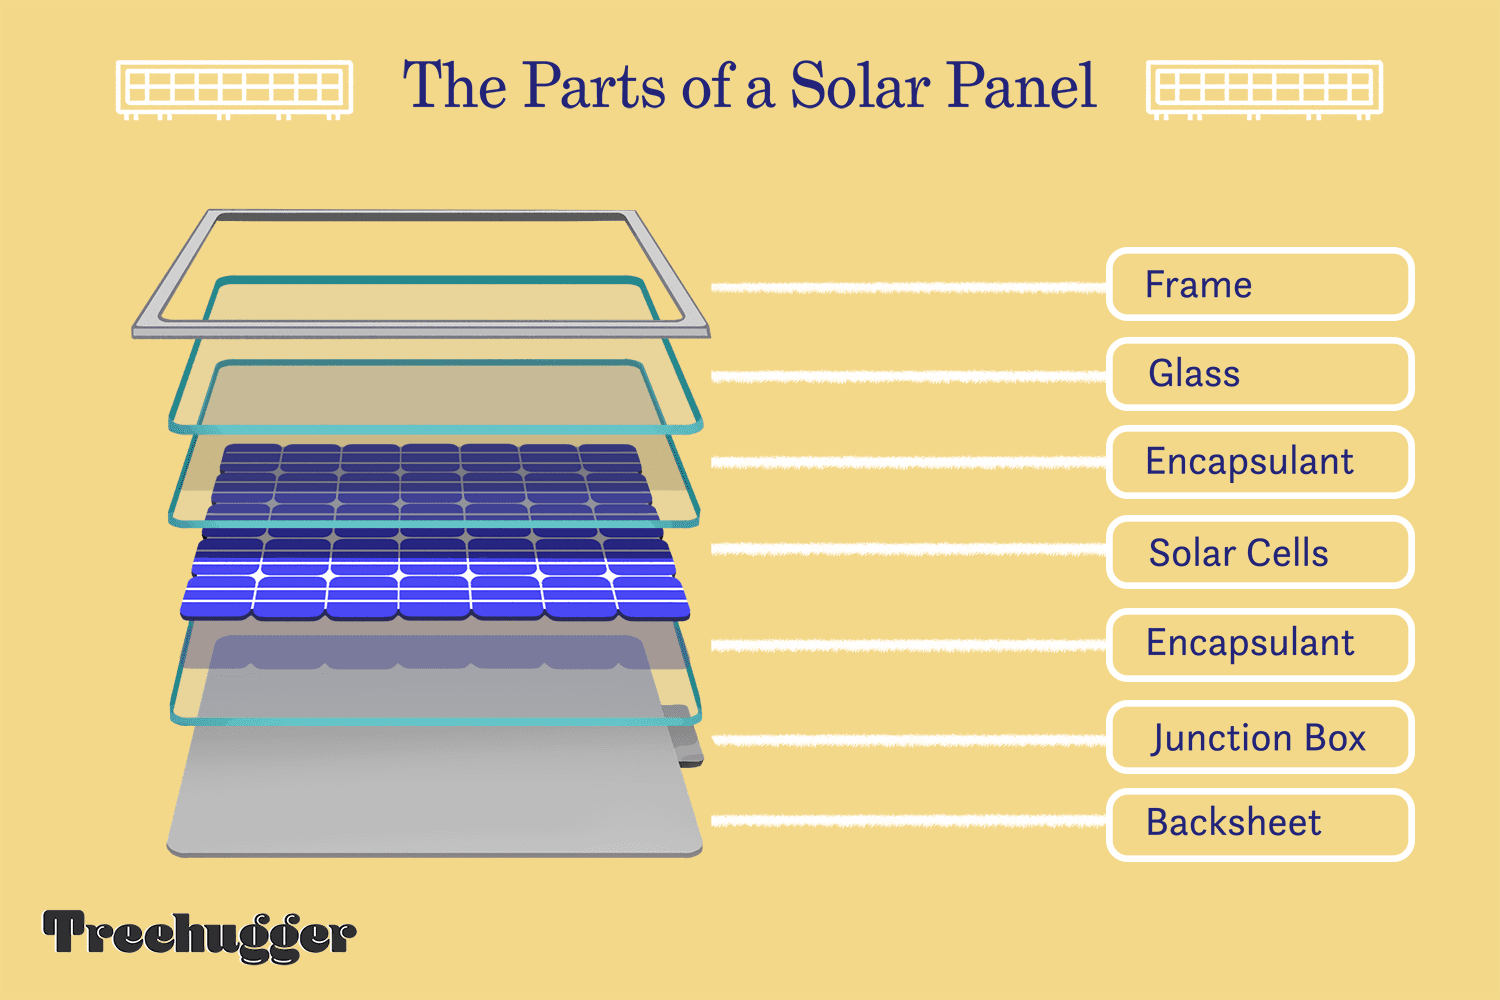 What are solar panels made of